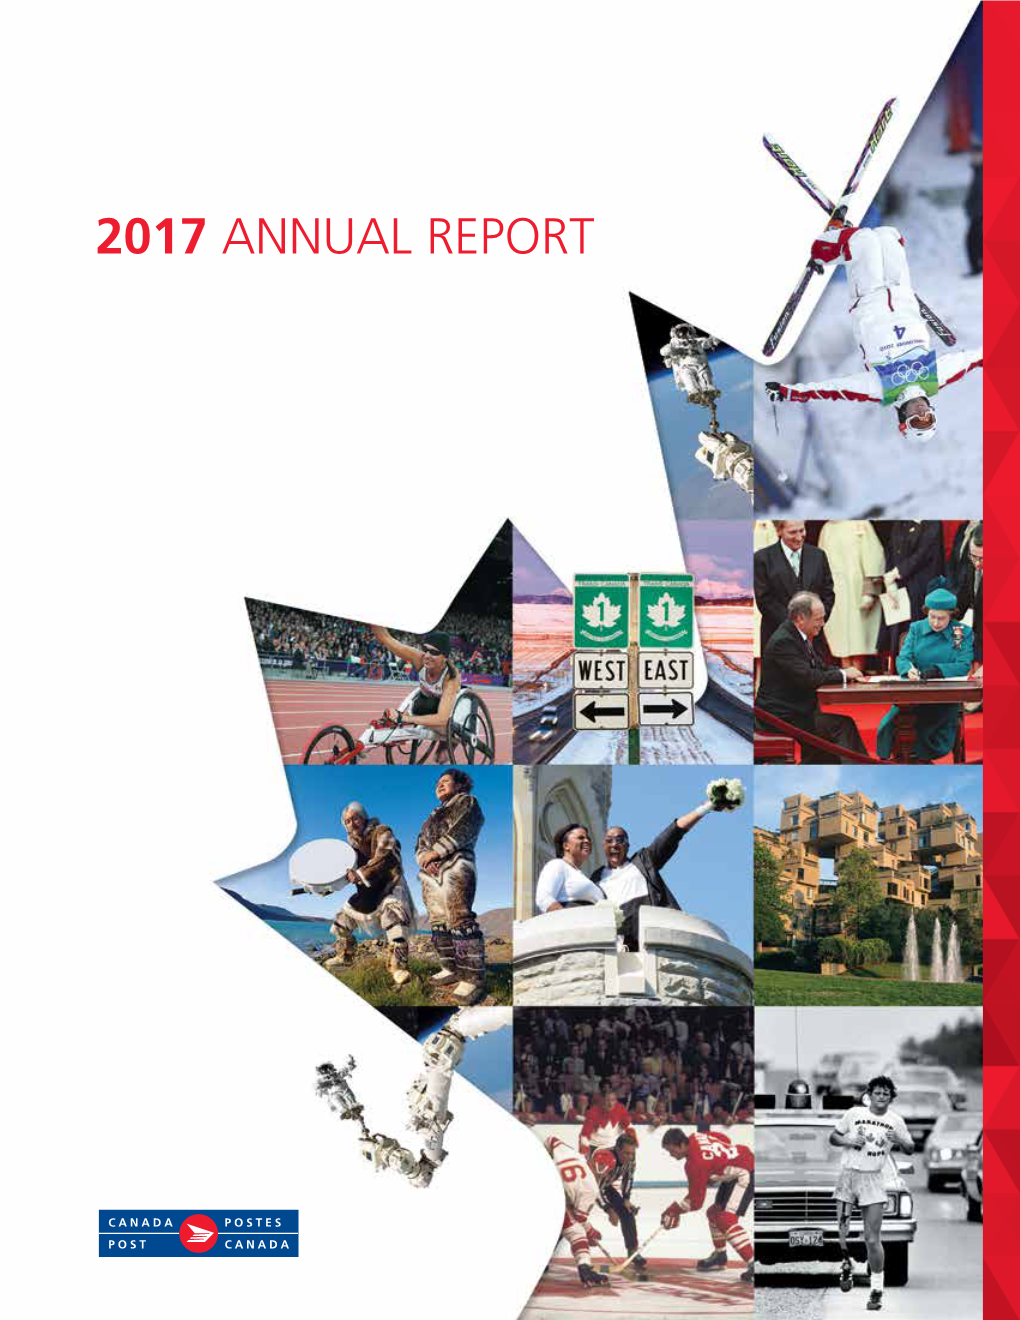 2017 ANNUAL REPORT Our $74M Profit Before Tax in 2017* Was Driven by Our Success in E-Commerce Delivery